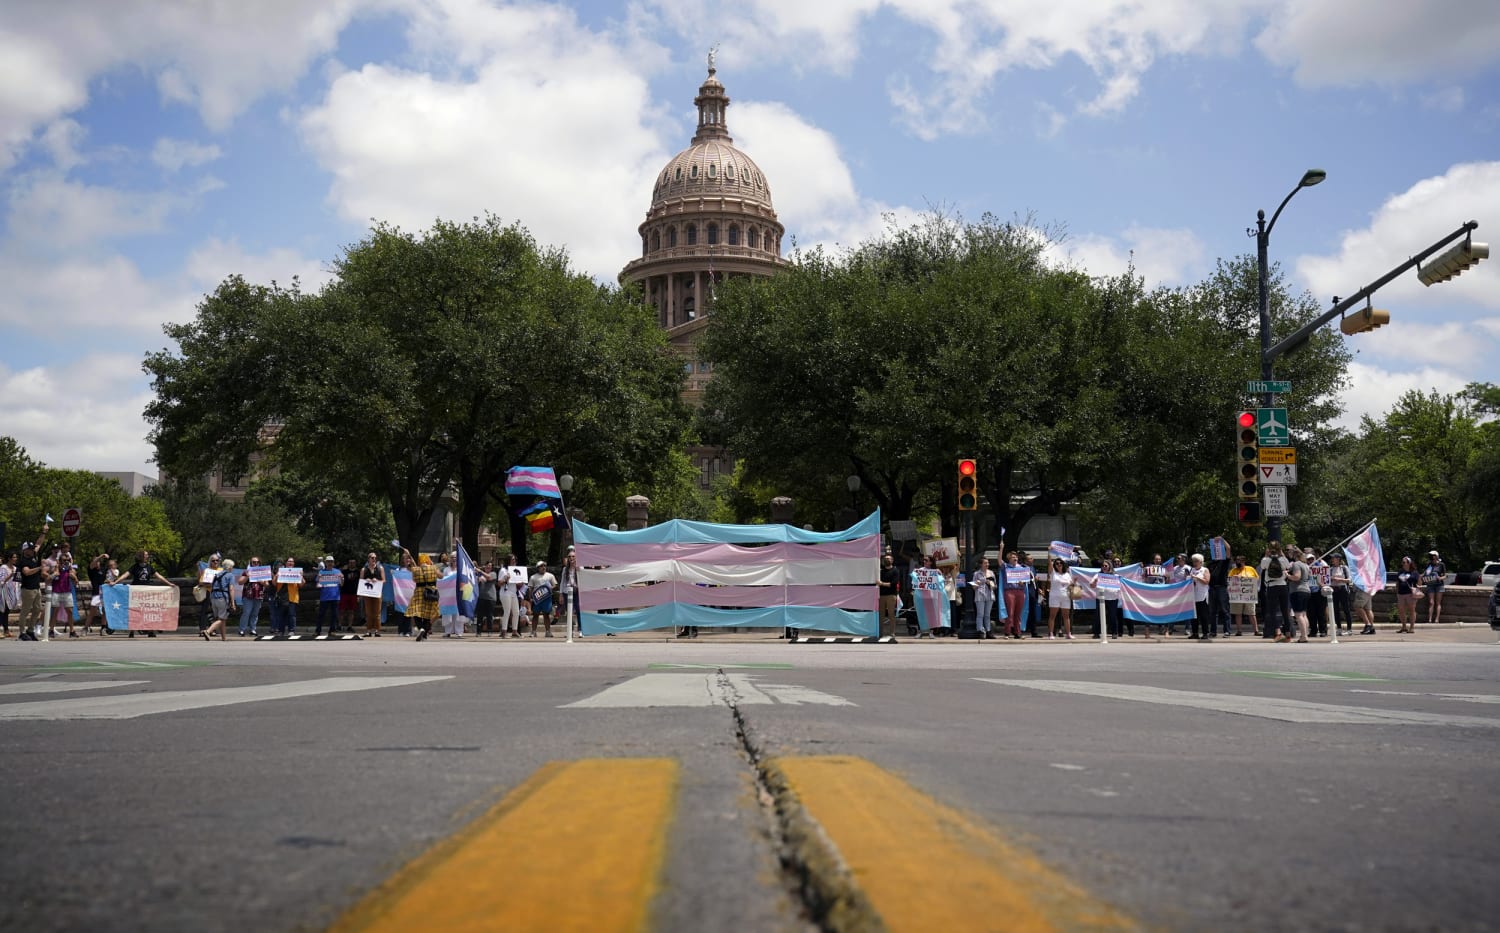 It's official: Texas all but forbidden trans parents from speaking out thumbnail